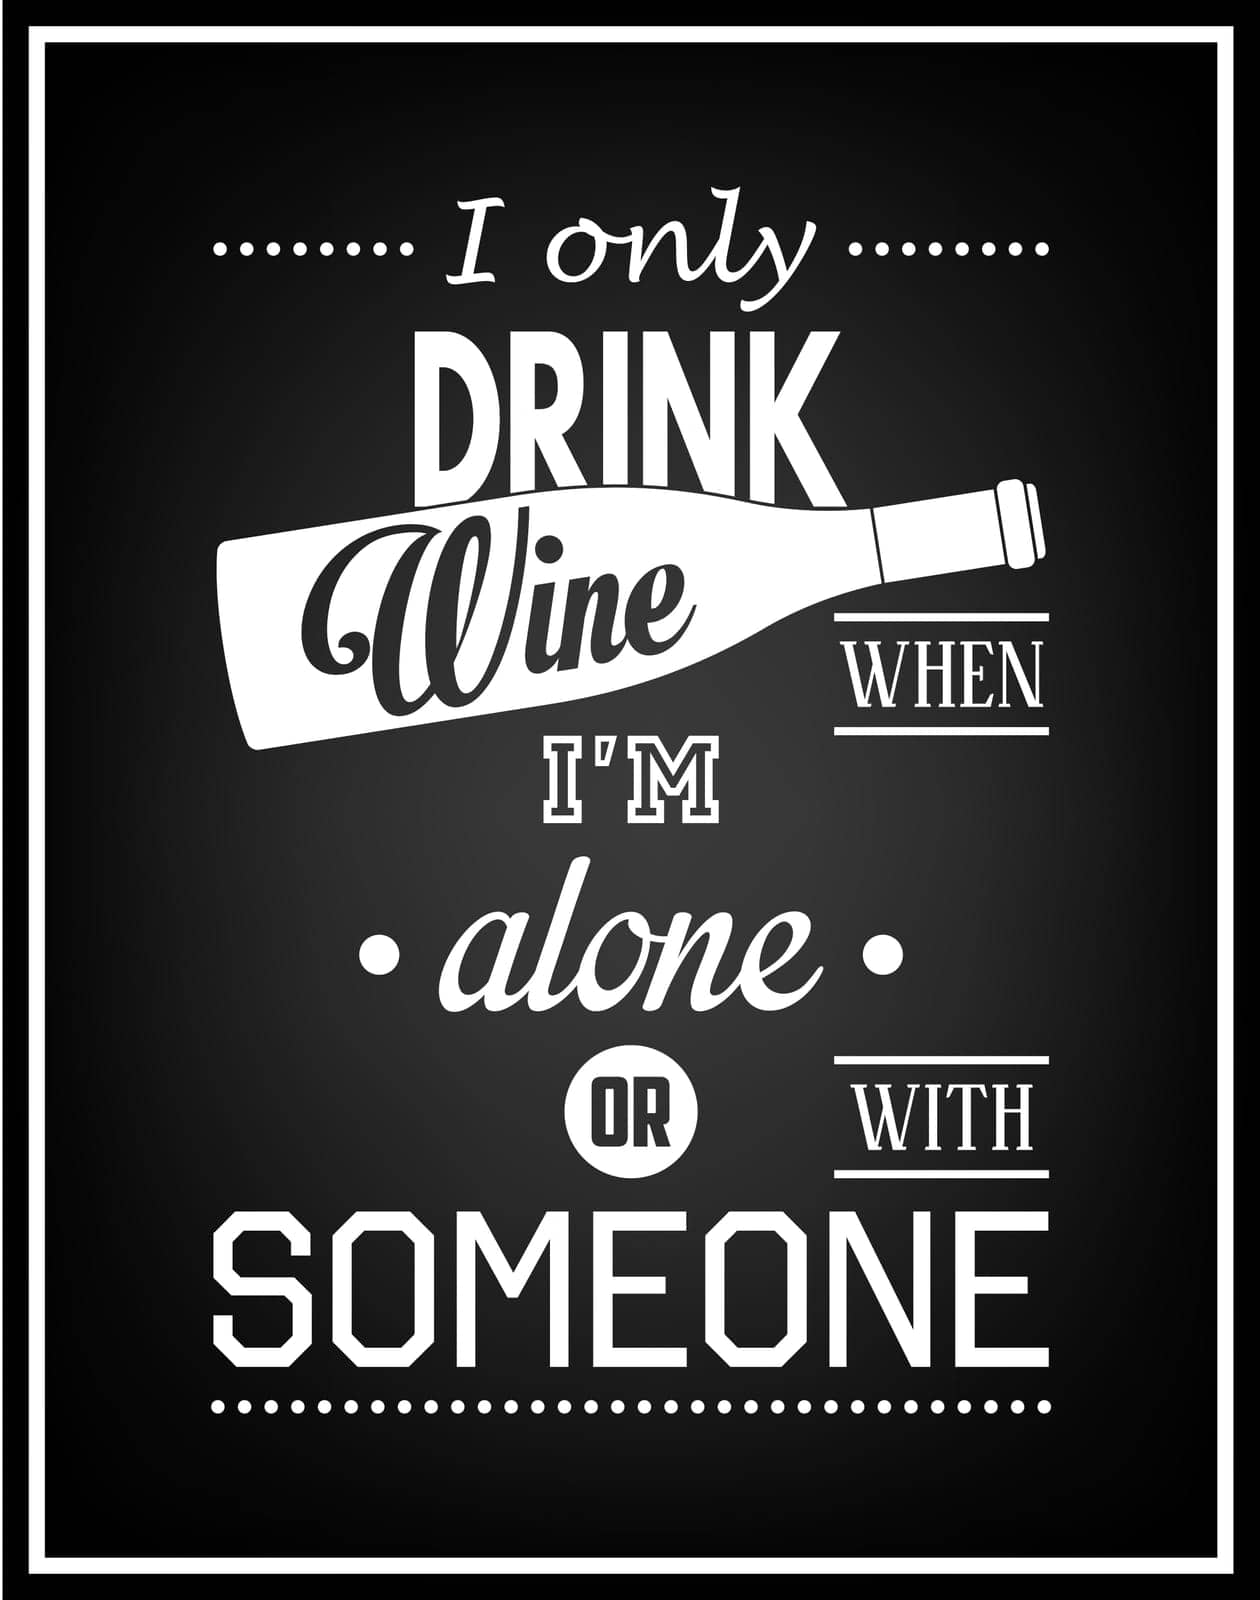 I only drink wine when i am alone or with someone - Quote Typographical Background. Vector EPS8 illustration.